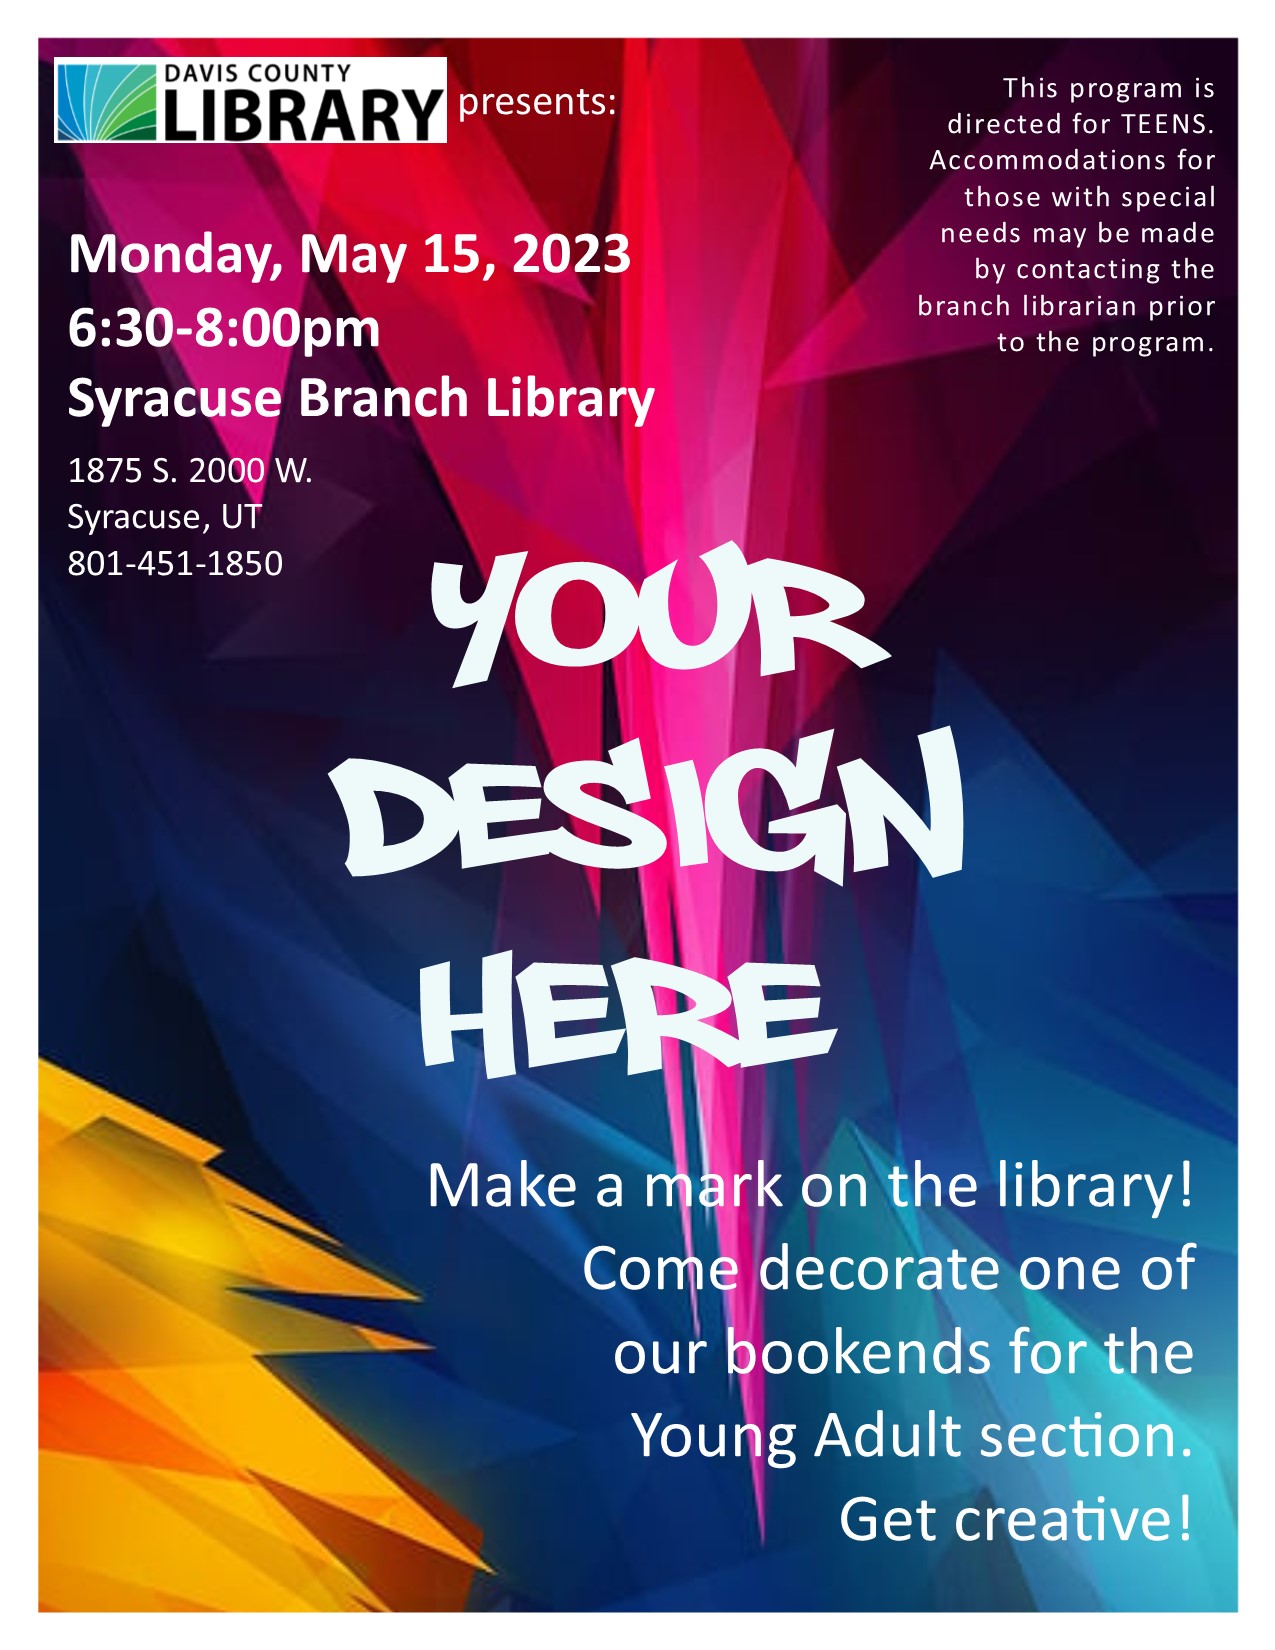 Your Design Here. Make a mark on the library! Come decorate one of our bookends for the Young Adult section.  Get creative!